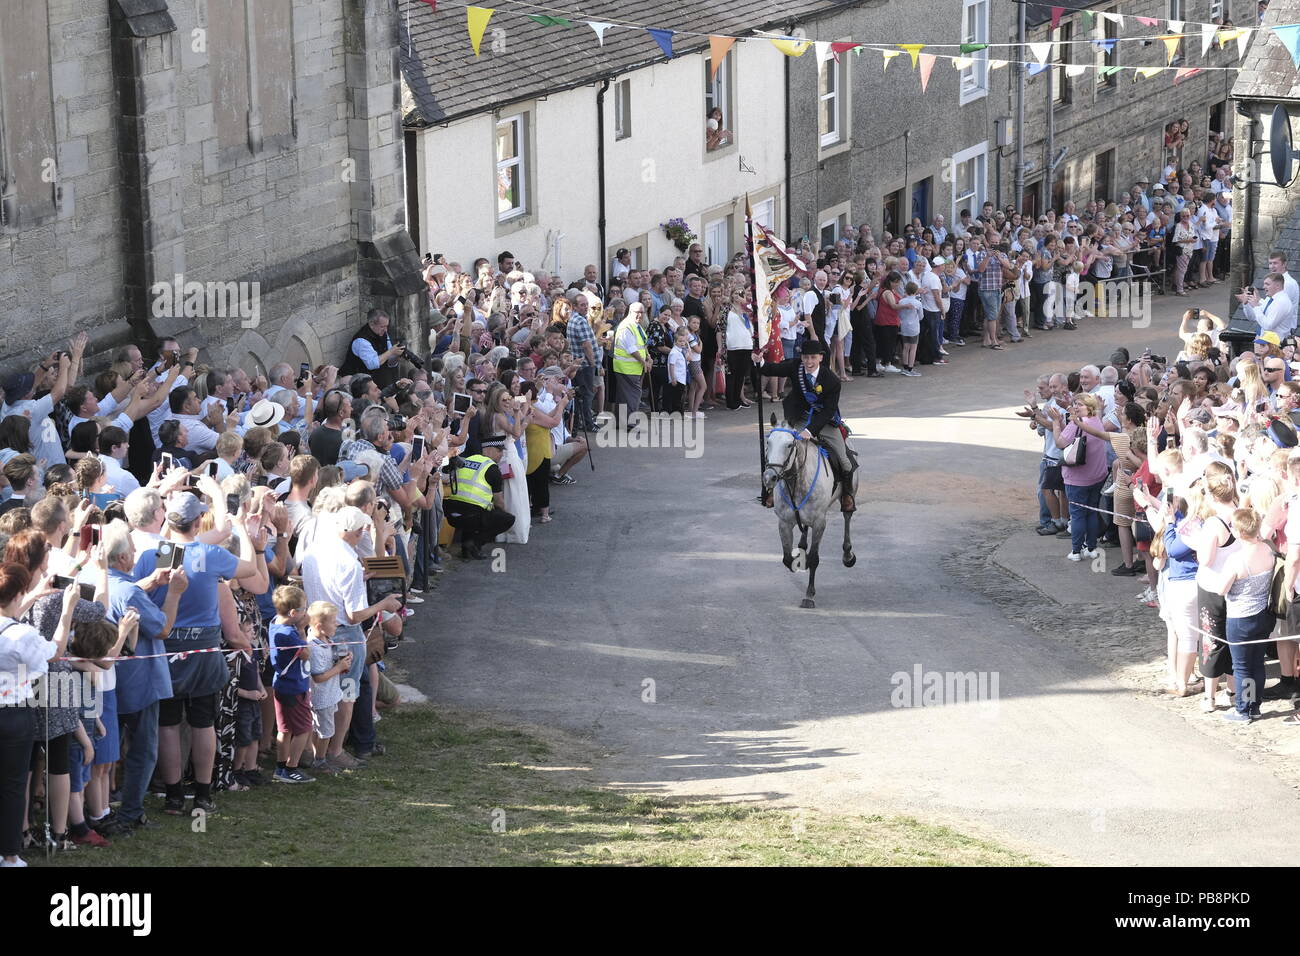 Langholm, Scotland, UK. 27th July, 2018.    Langholm Common Riding - 'Langholm's Great Day' Langholm Cornet Iain Little gallops up the Kirk Wynd ahead of his mounted supporters in Langholm, 'The Muckle Toon' has seen tradition upheld for over 250 years with the Annual Langholm Common Riding which takes place every year on the last Friday in July, This year falling on Friday 27th.   Credit: Rob Gray/Alamy Live News Stock Photo